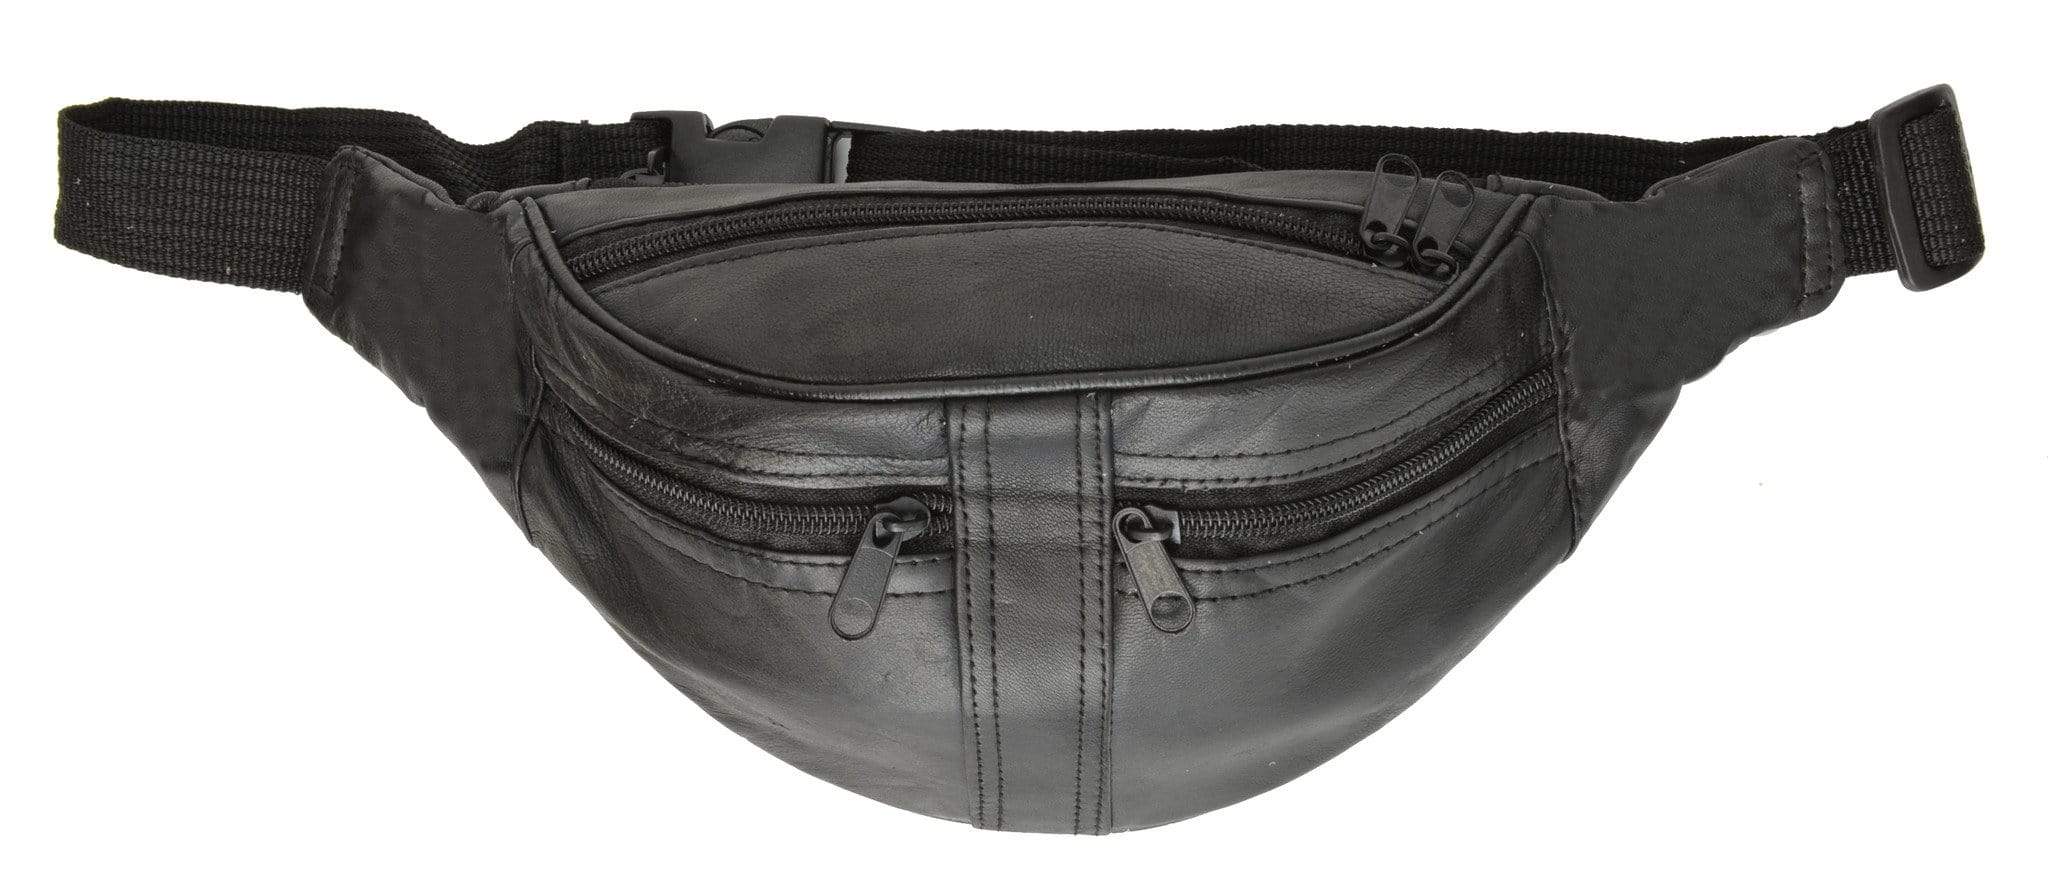 Ctm Leather Extra Large Fanny Pack Up To 52 Waist :: Keweenaw Bay ...